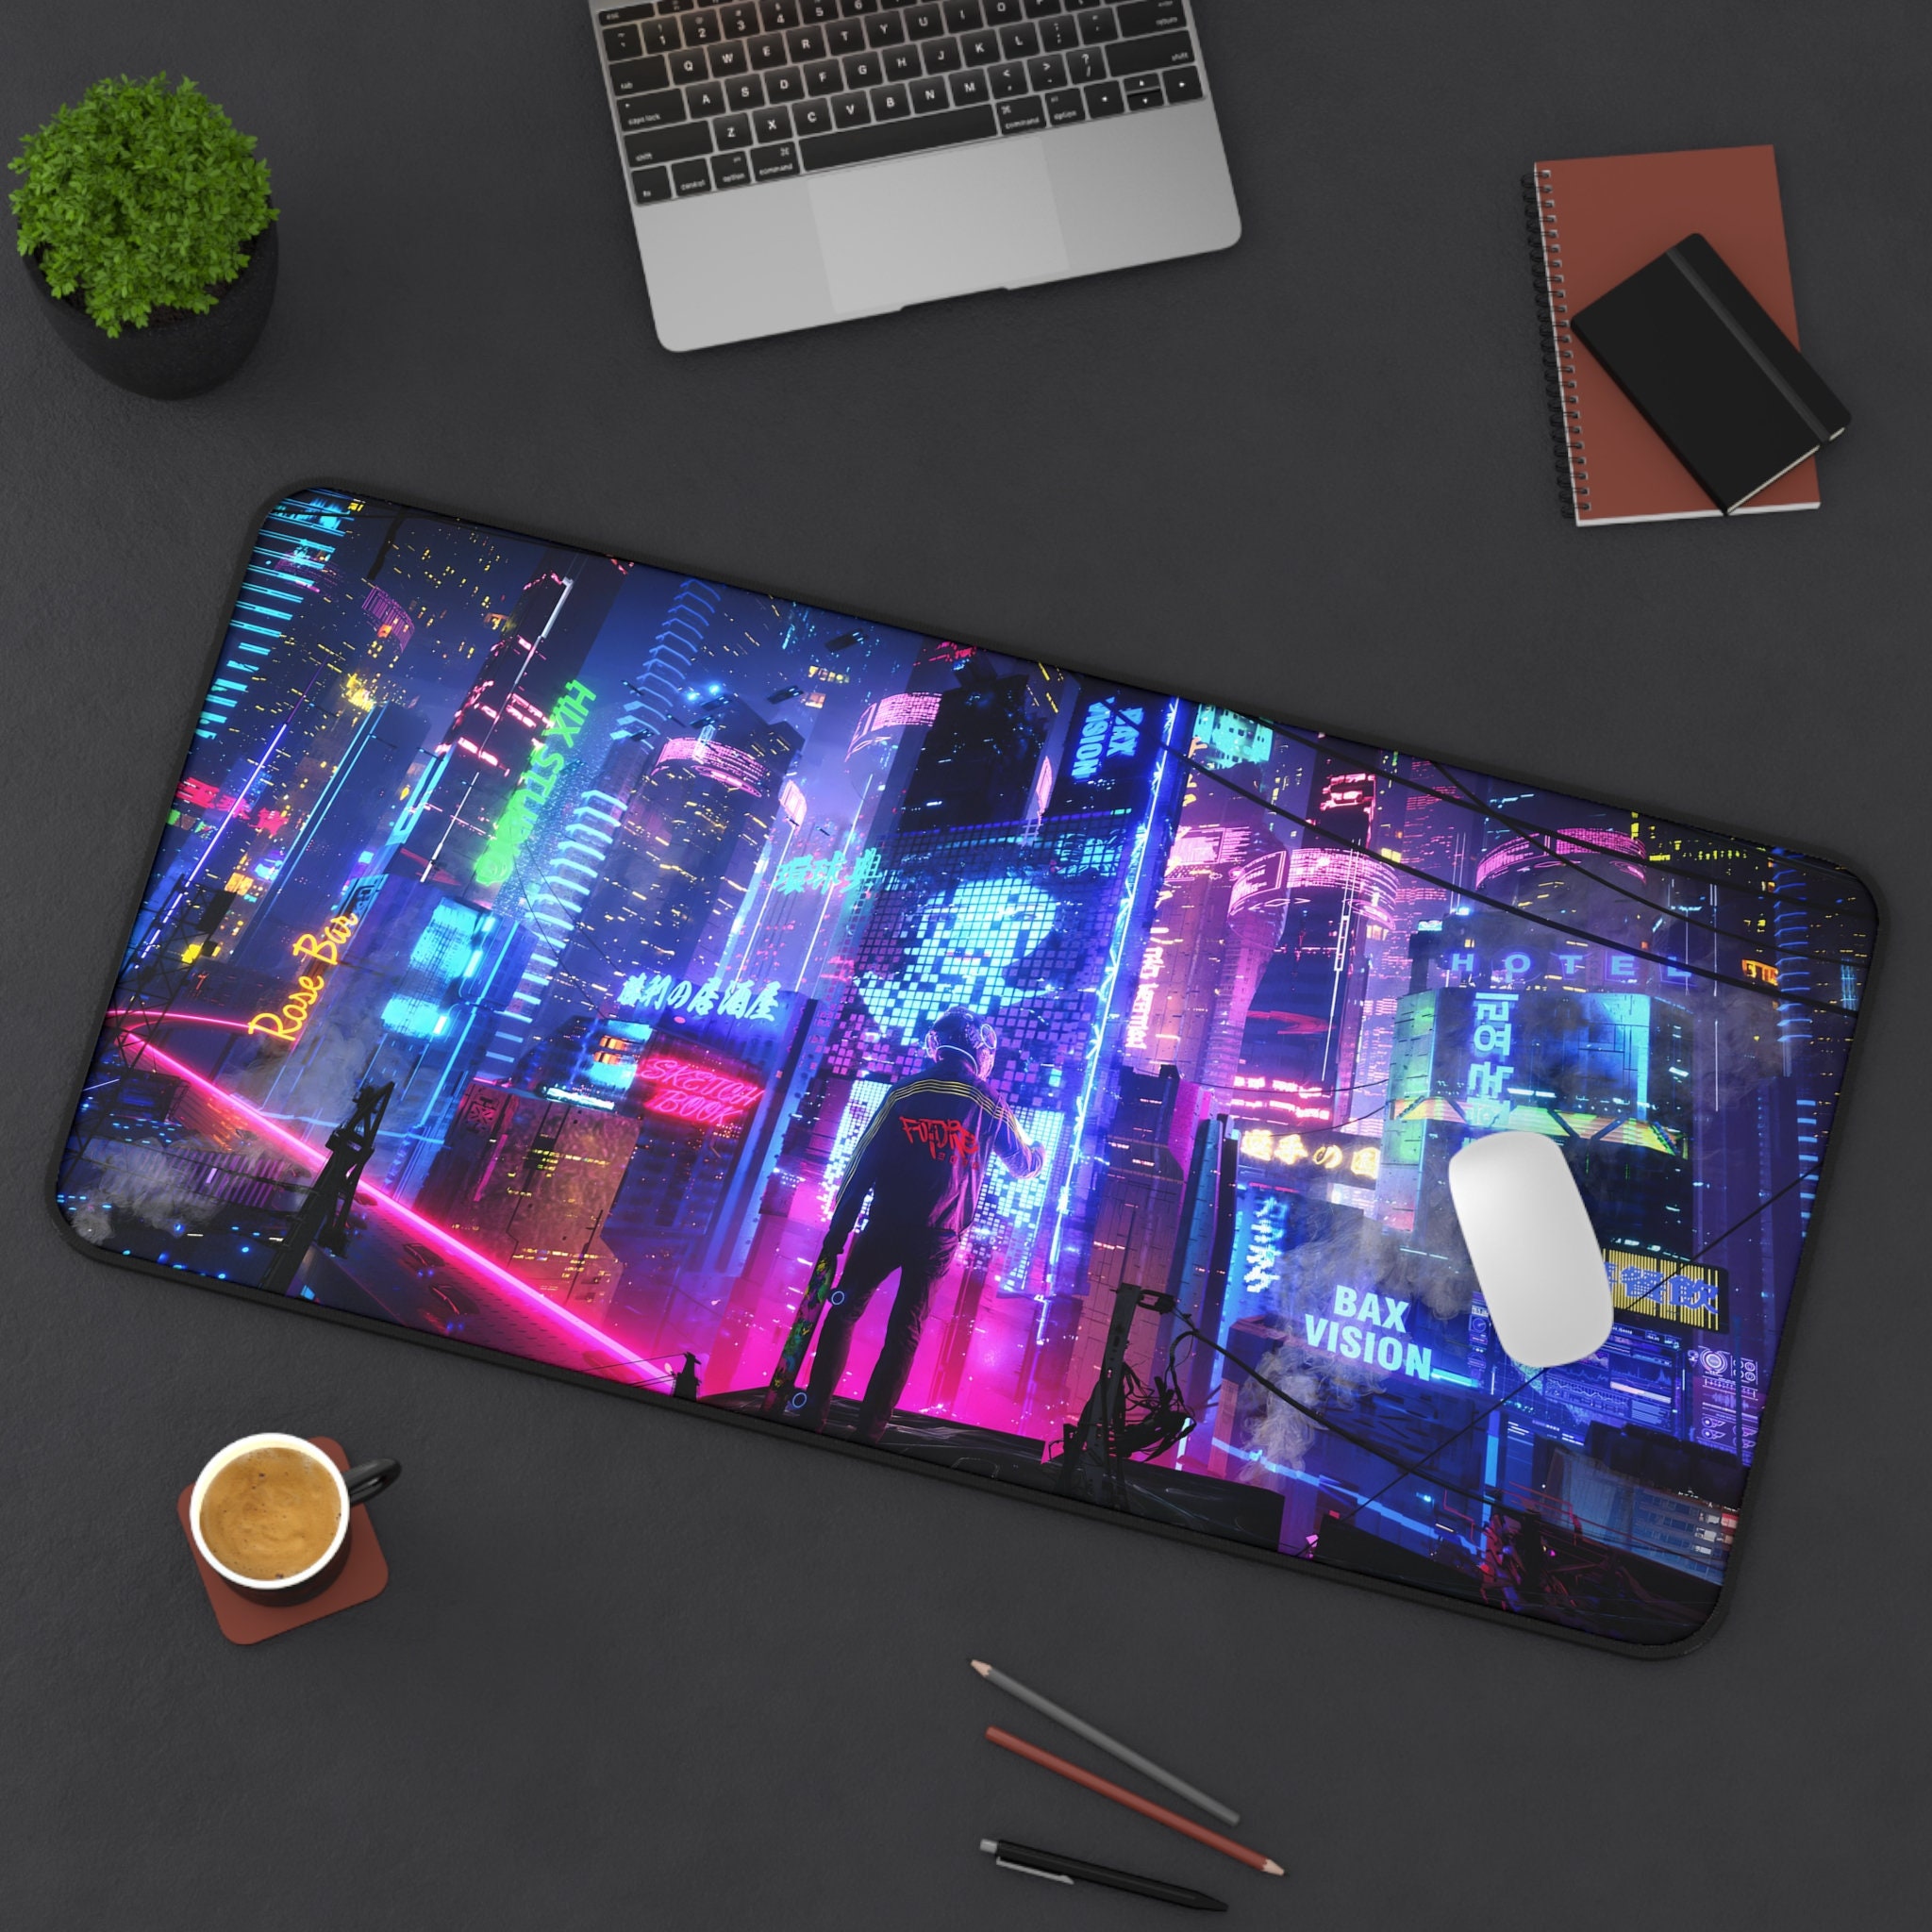 Cyberpunk Anime Girl Desk Pad Protector,Cyberpunk City Gaming Mouse Pad,Vaporwave  City Desk Mat sold by Well-Known Newscast, SKU 5451761